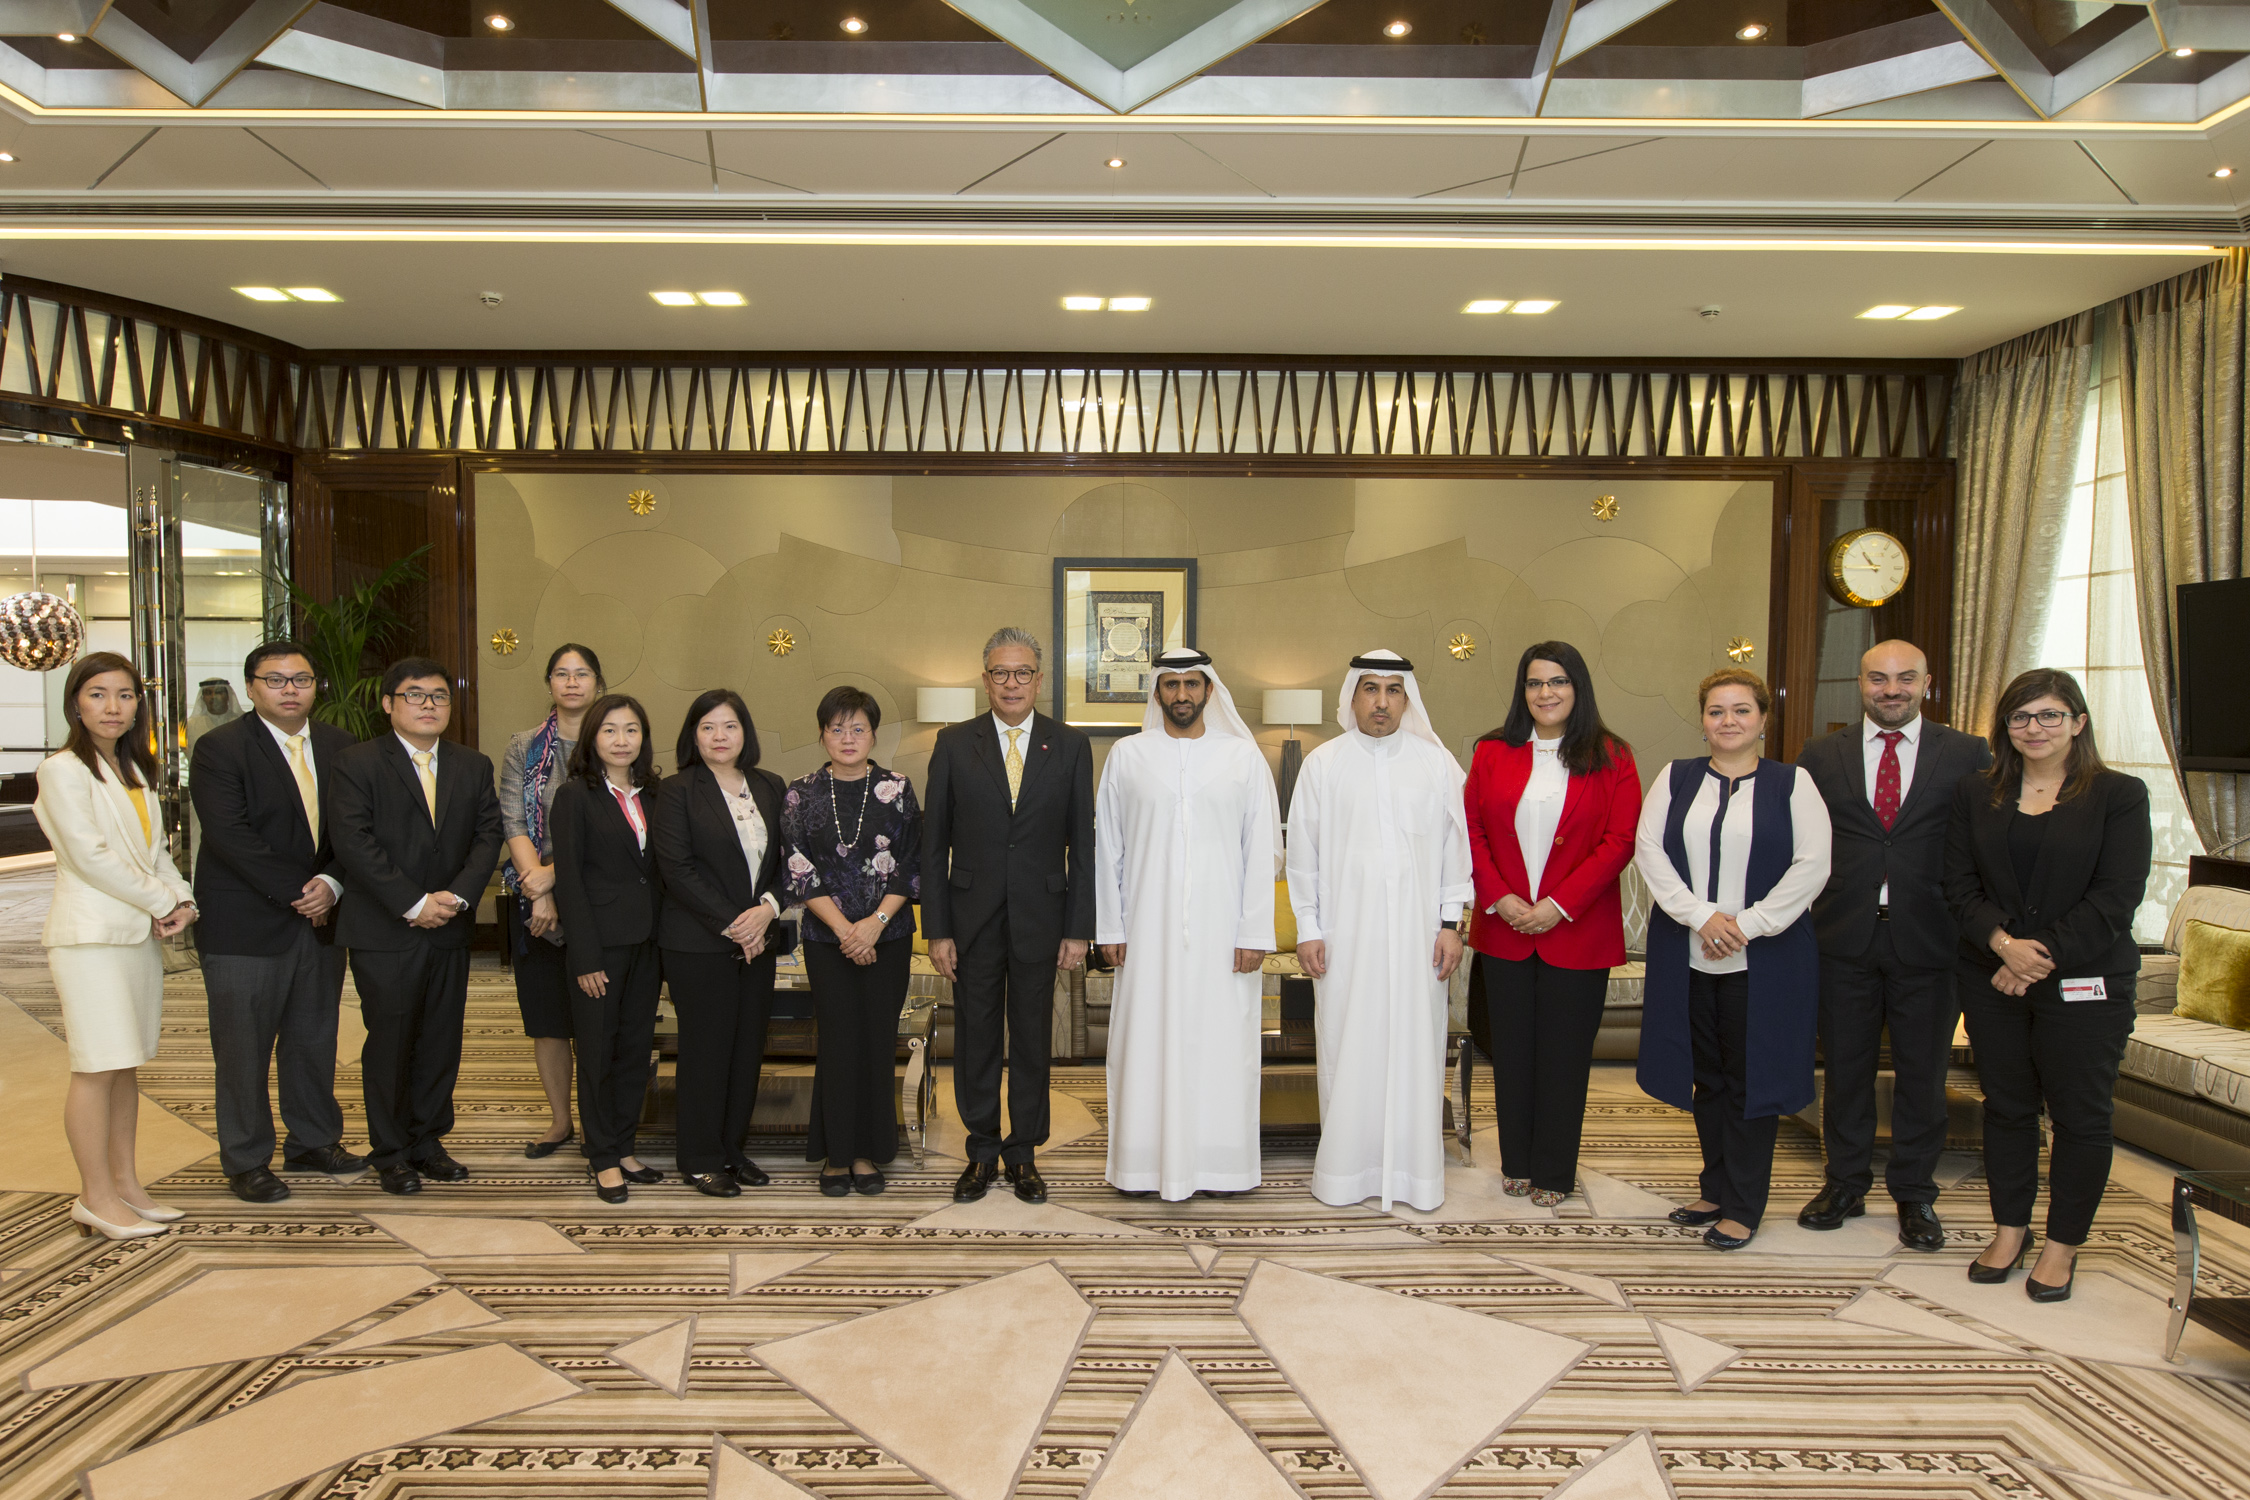 The Government of Dubai Legal Affairs Department briefed a Thai delegation on its experience in the legal sector